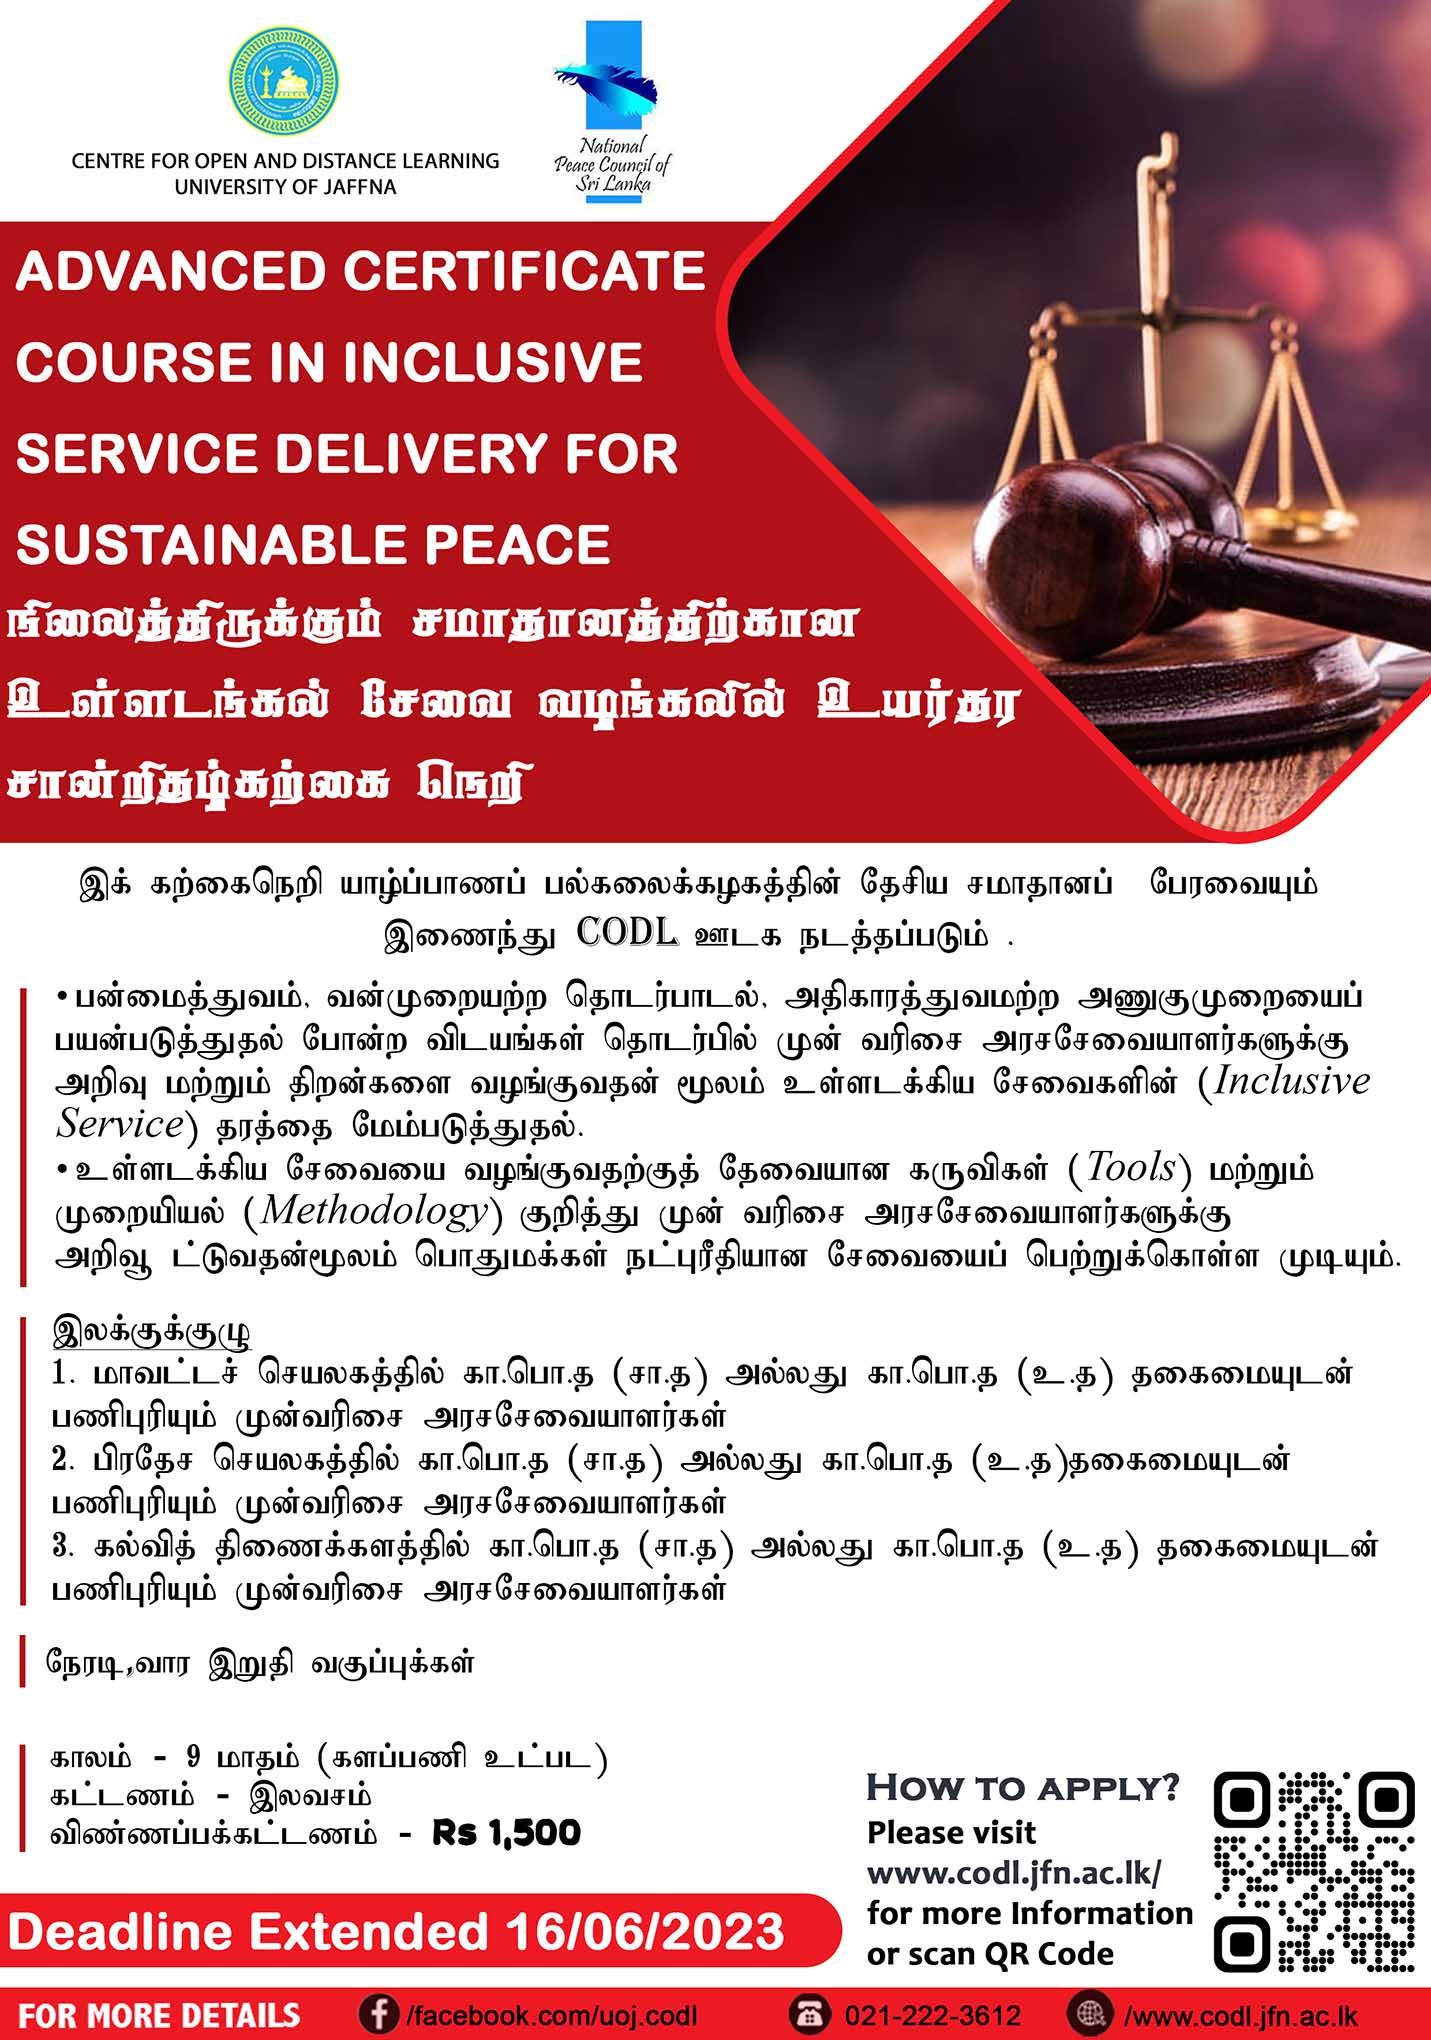 Advanced Certificate Course in Inclusive Service Delivery for Sustainable Peace 2023 - University of Jaffna